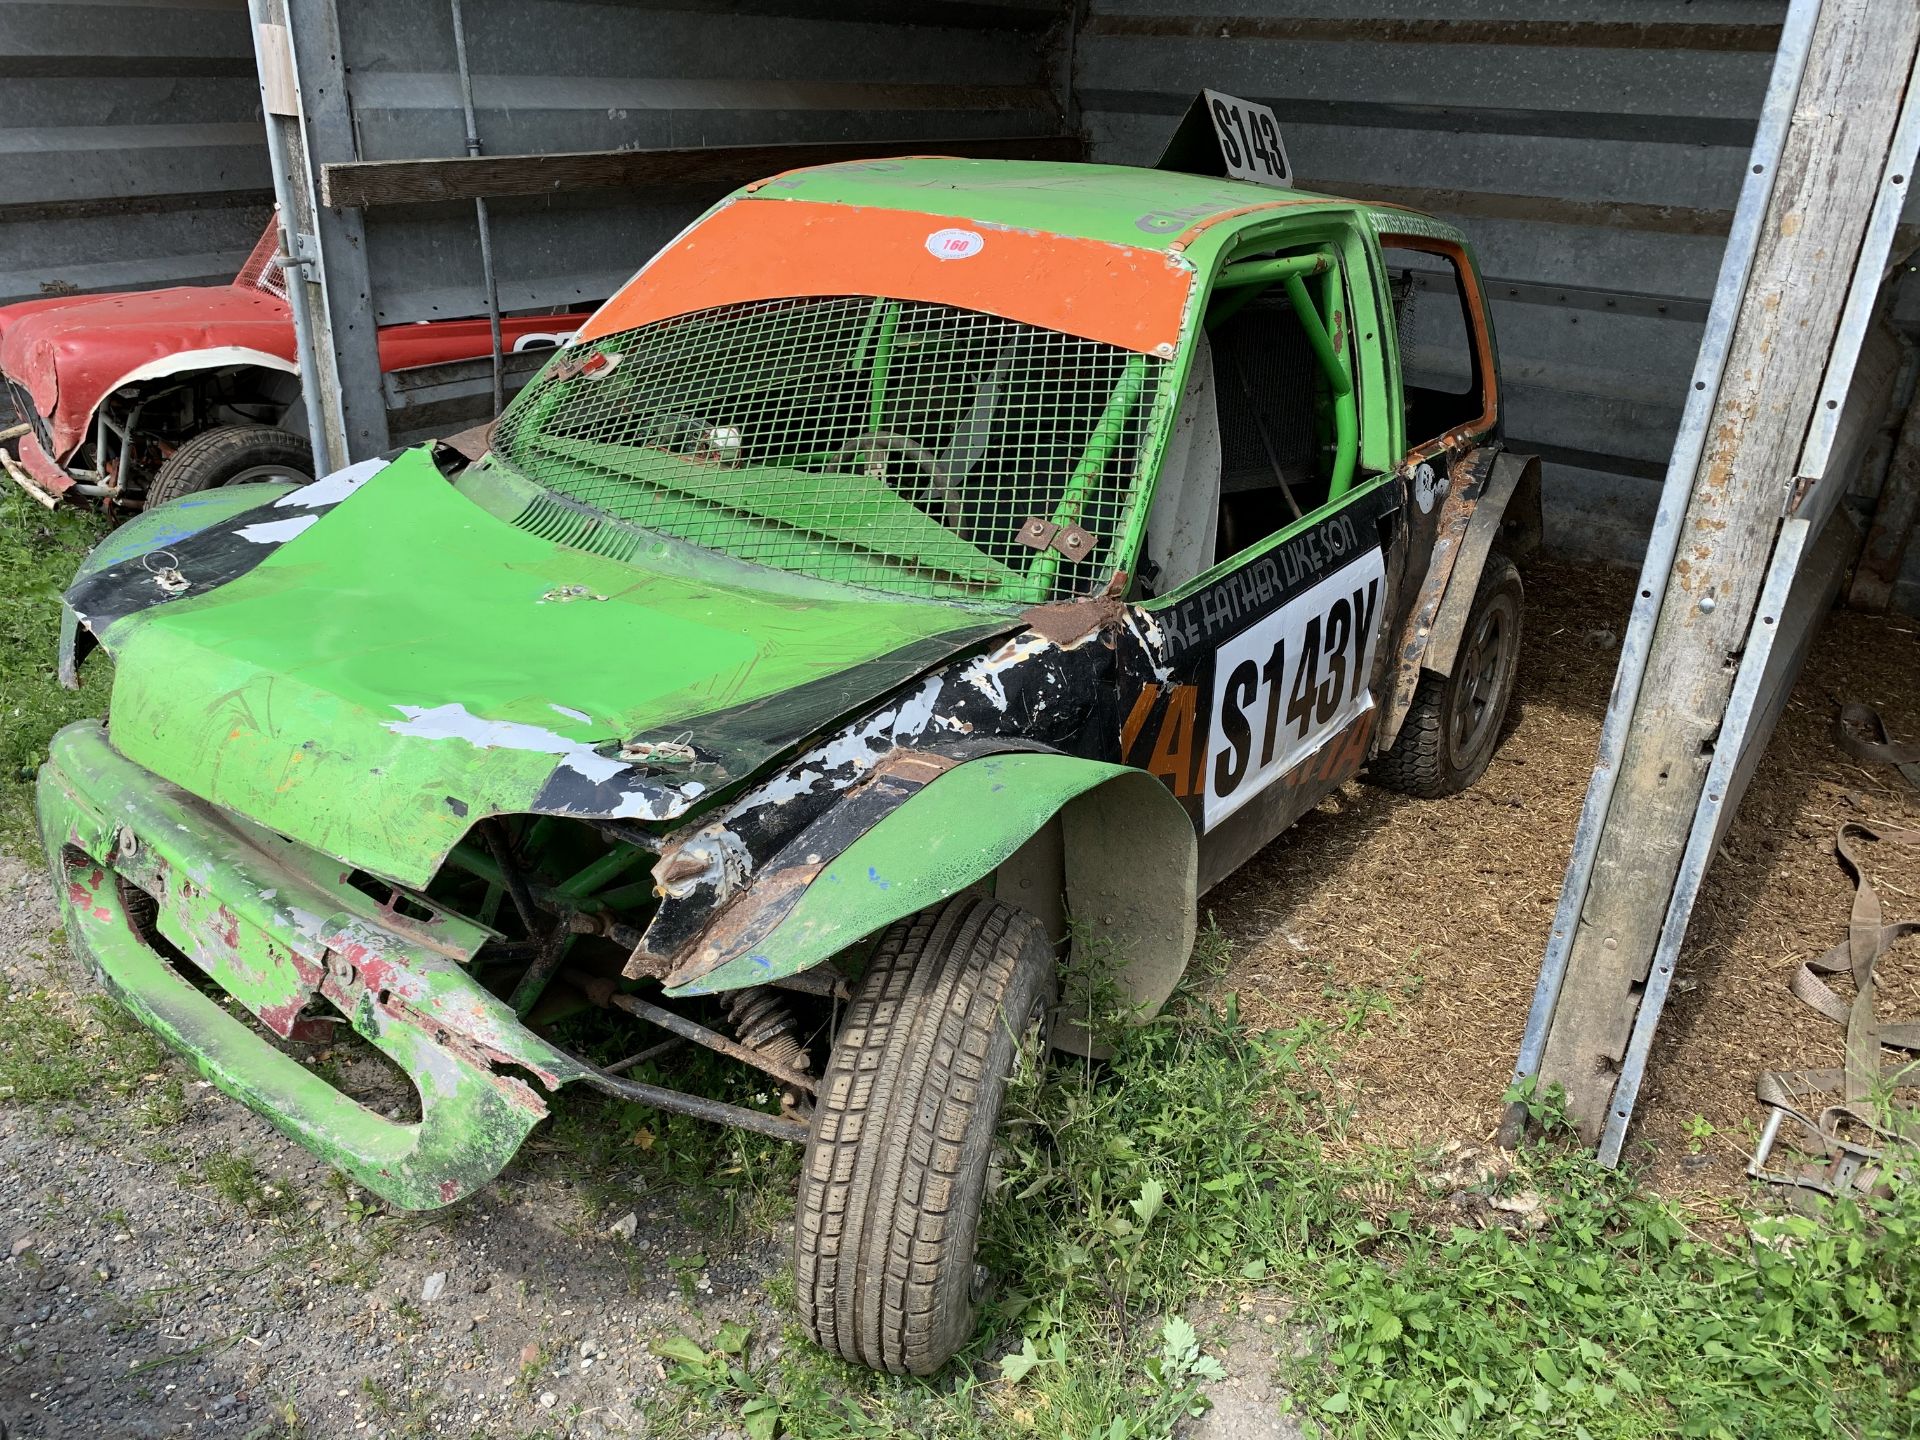 Class 7 Autograss car, tagged cage